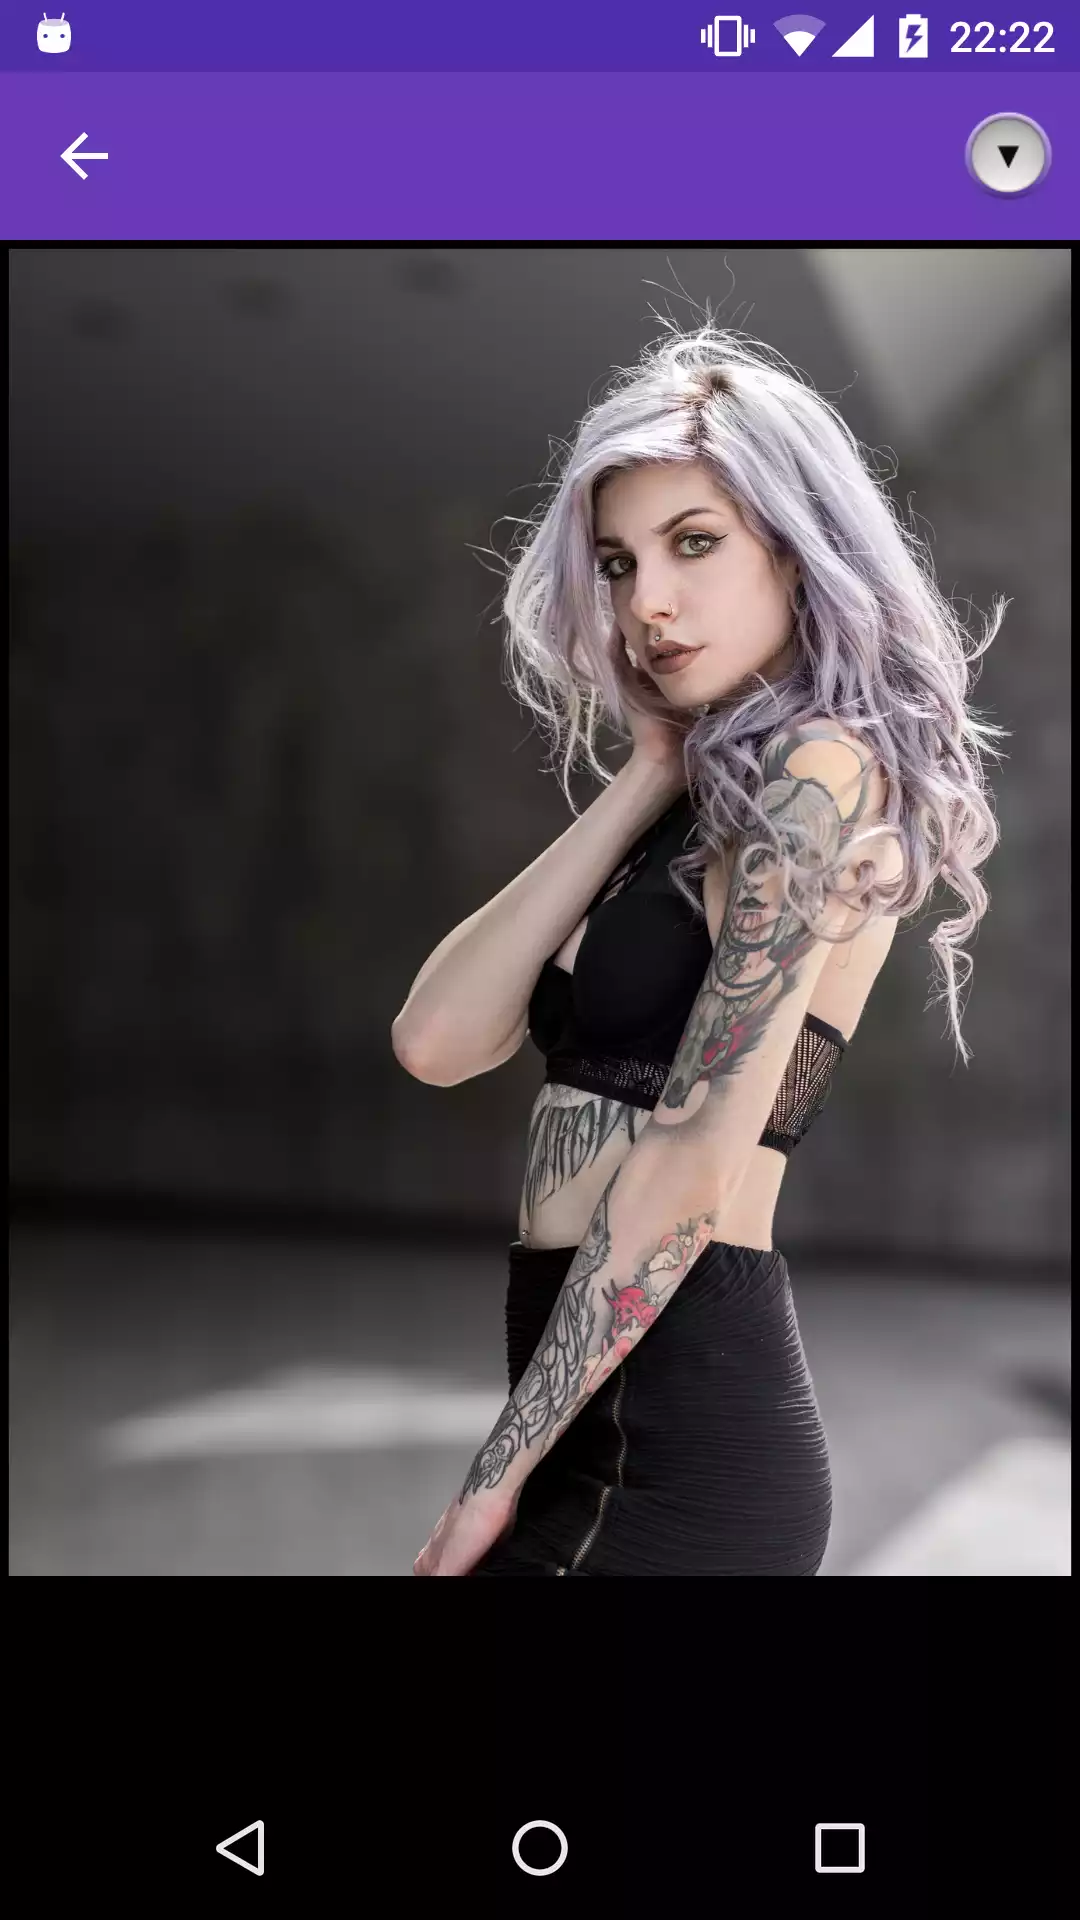 Tattoo Wallpapers anime,photo,amateur,hentai,android,tattoo,girls,porn,wallpapers,apps,apk,video,app,pornstars,store,gallery,pics,femboy,erotic,adult,sex,sexy,pornstar